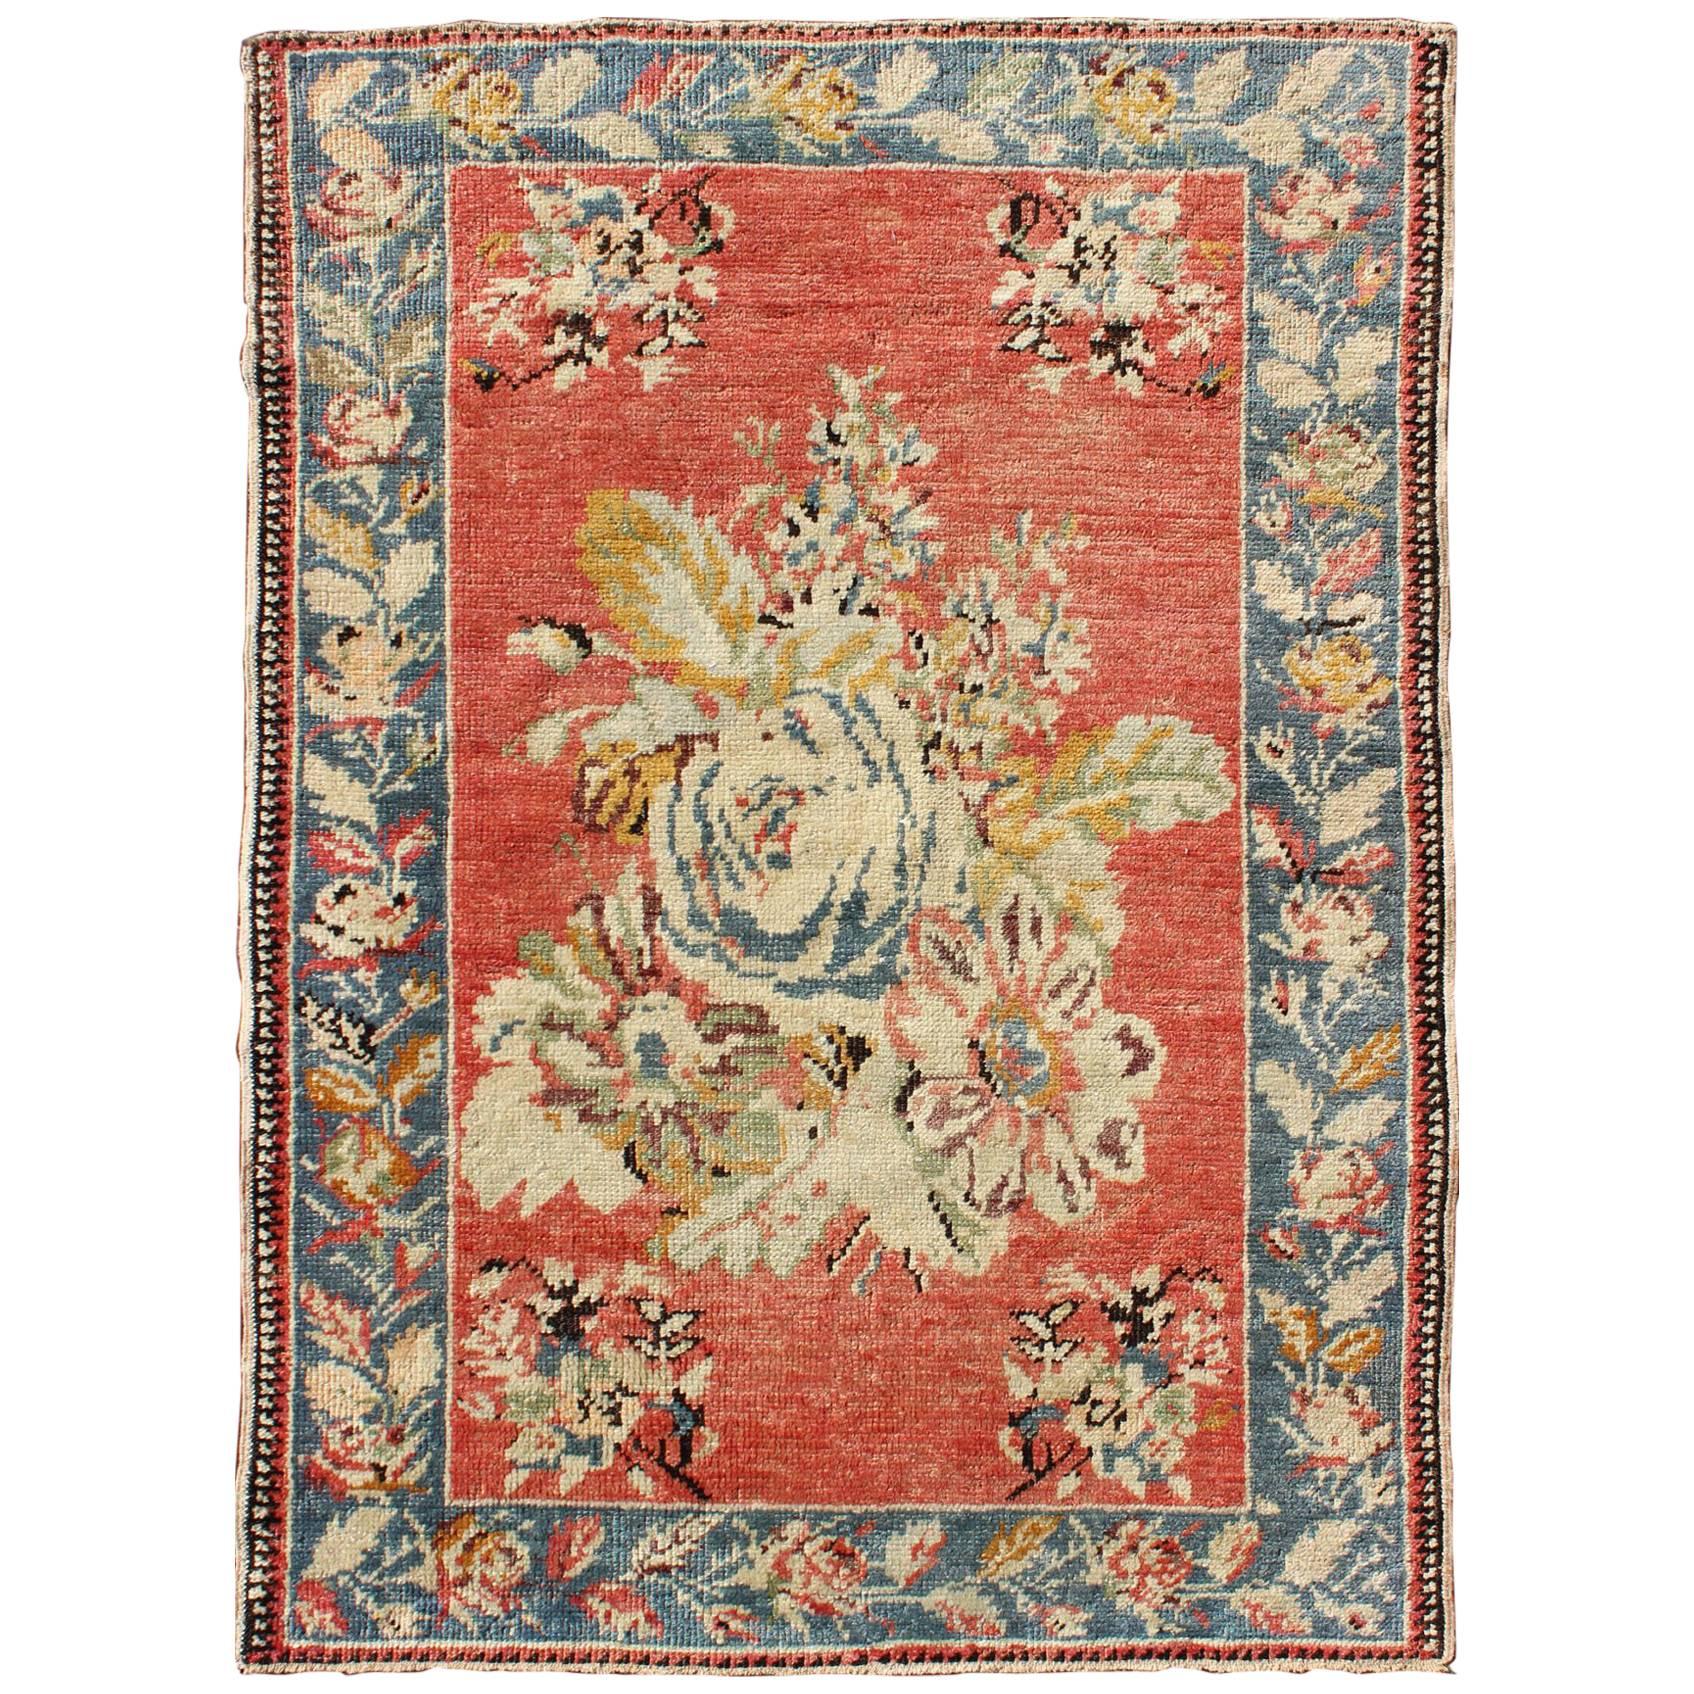 Vintage Turkish Oushak Carpet with Bouquets of Colorful Flowers in Red and Teal